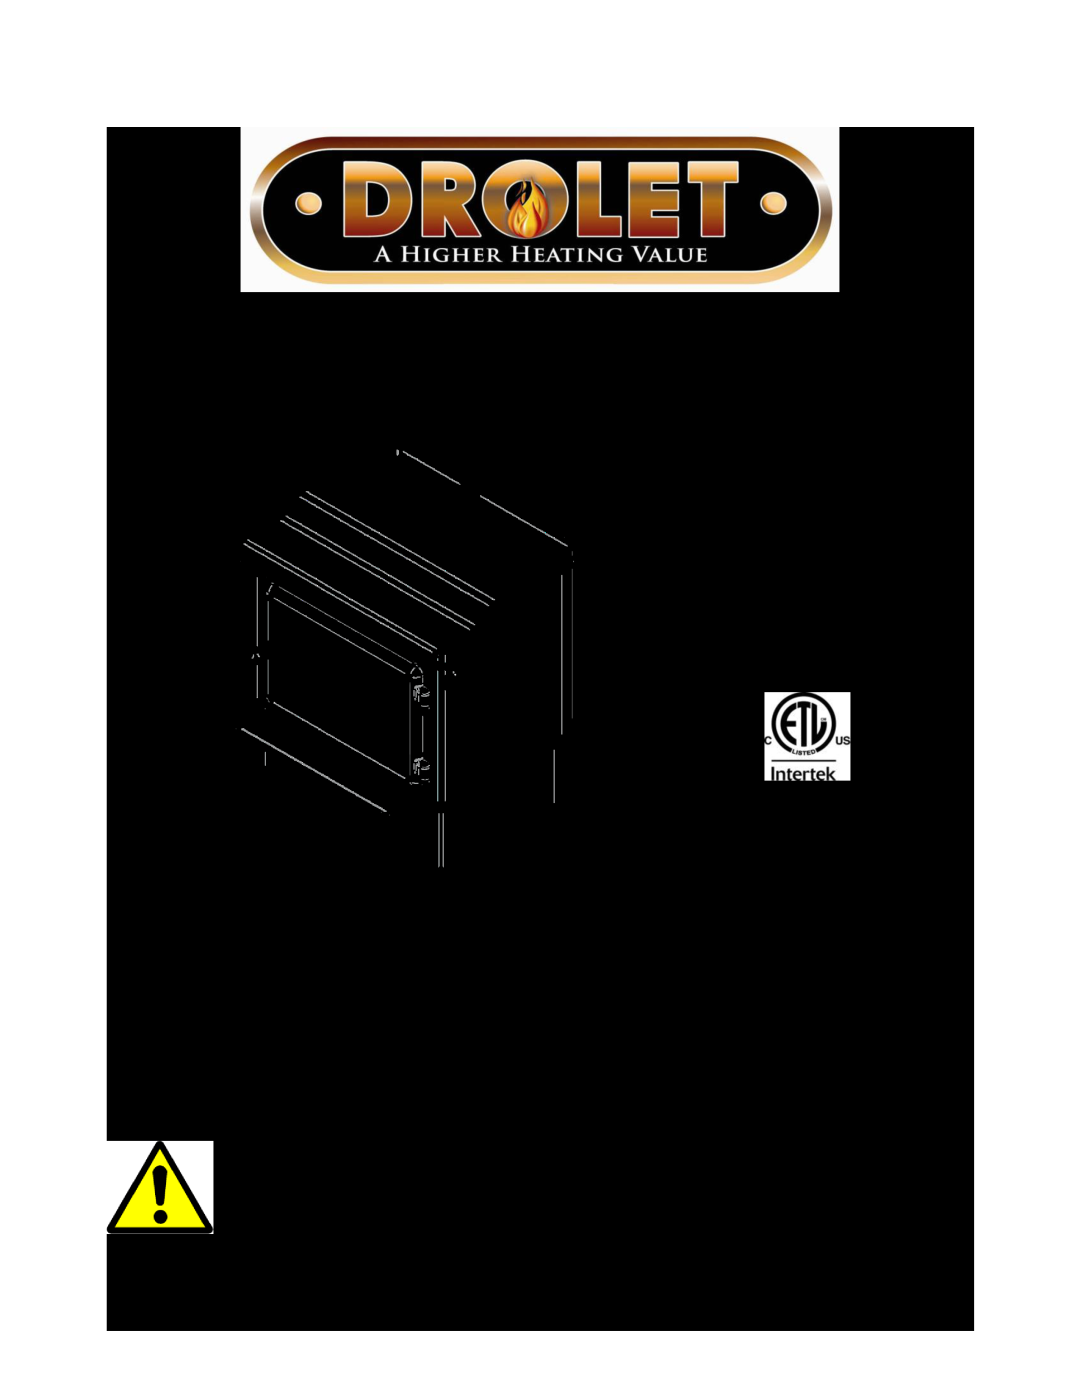 Drolet 45521A owner manual Rocket E.P.A. Wood Stove, Read And Keep This Manual For Reference, Owner’S Manual 